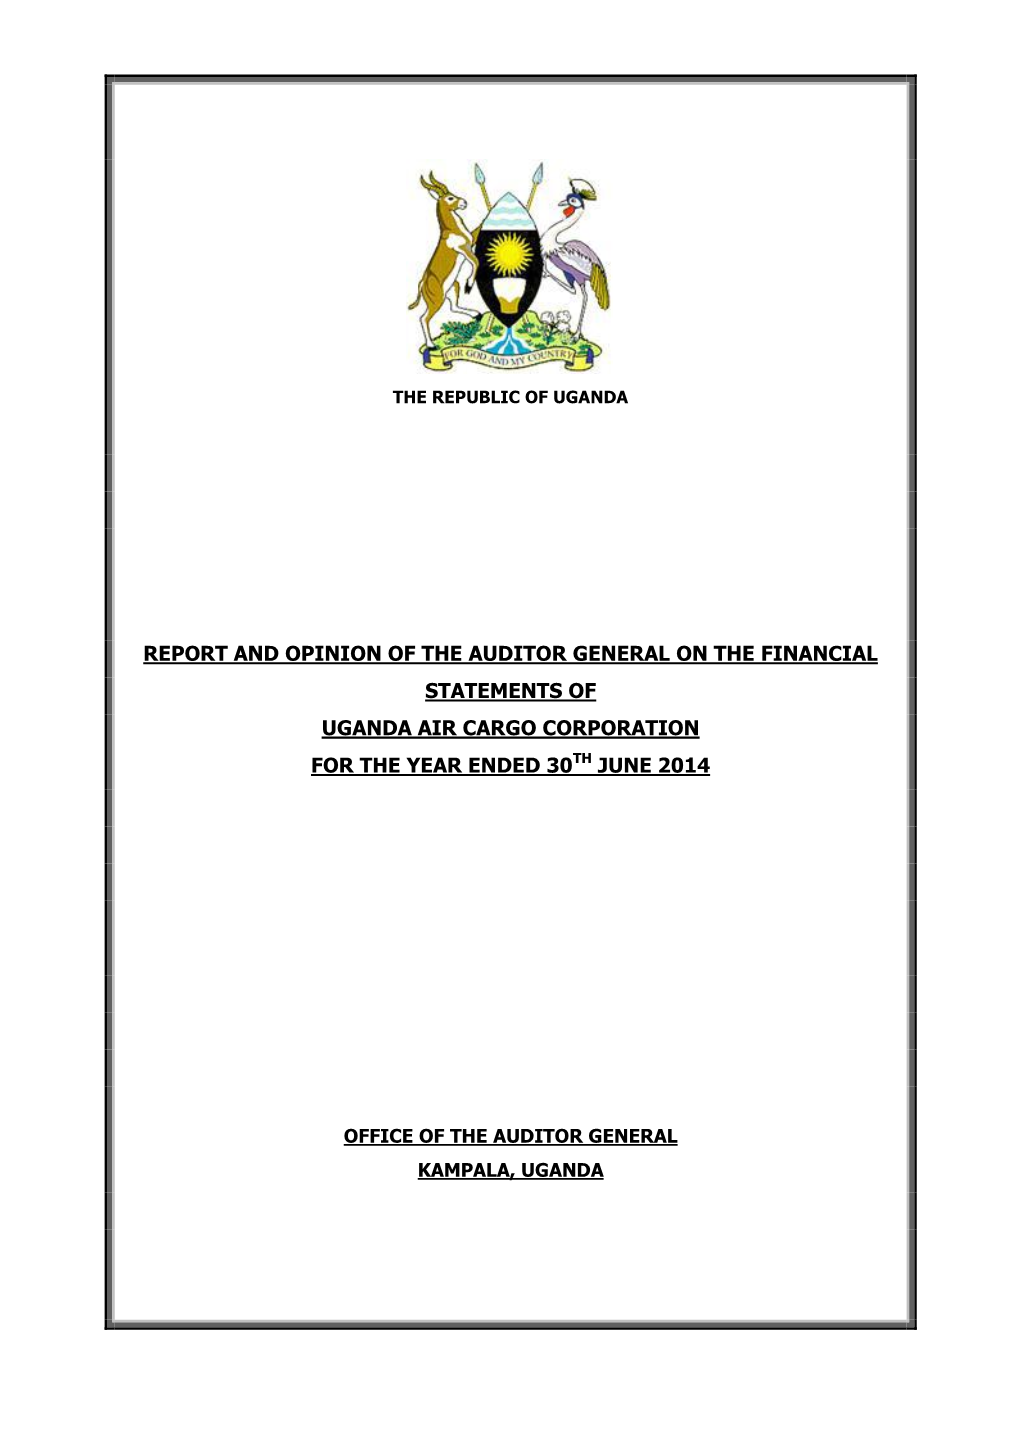 Report and Opinion of the Auditor General on the Financial Statements of Uganda Air Cargo Corporation for the Year Ended 30Th June 2014